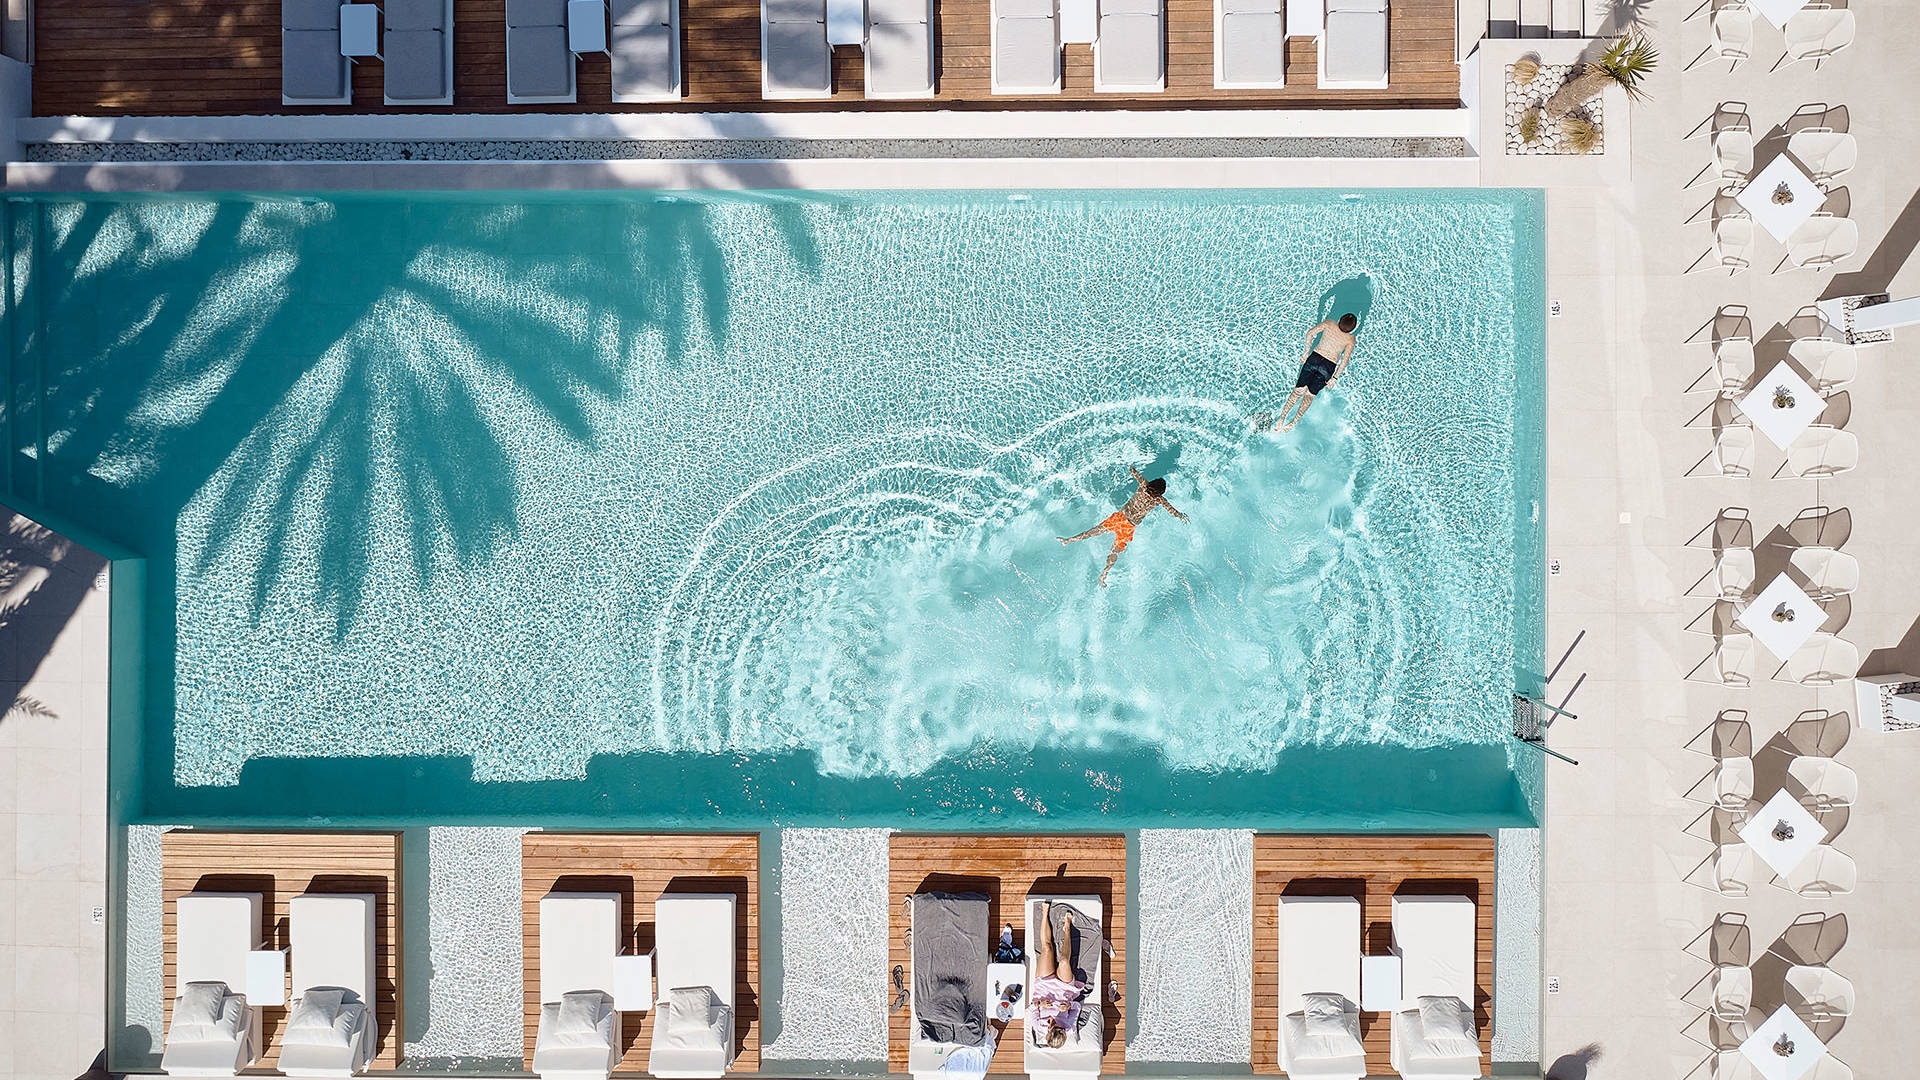 
Top-down view of the pool and sunbeds